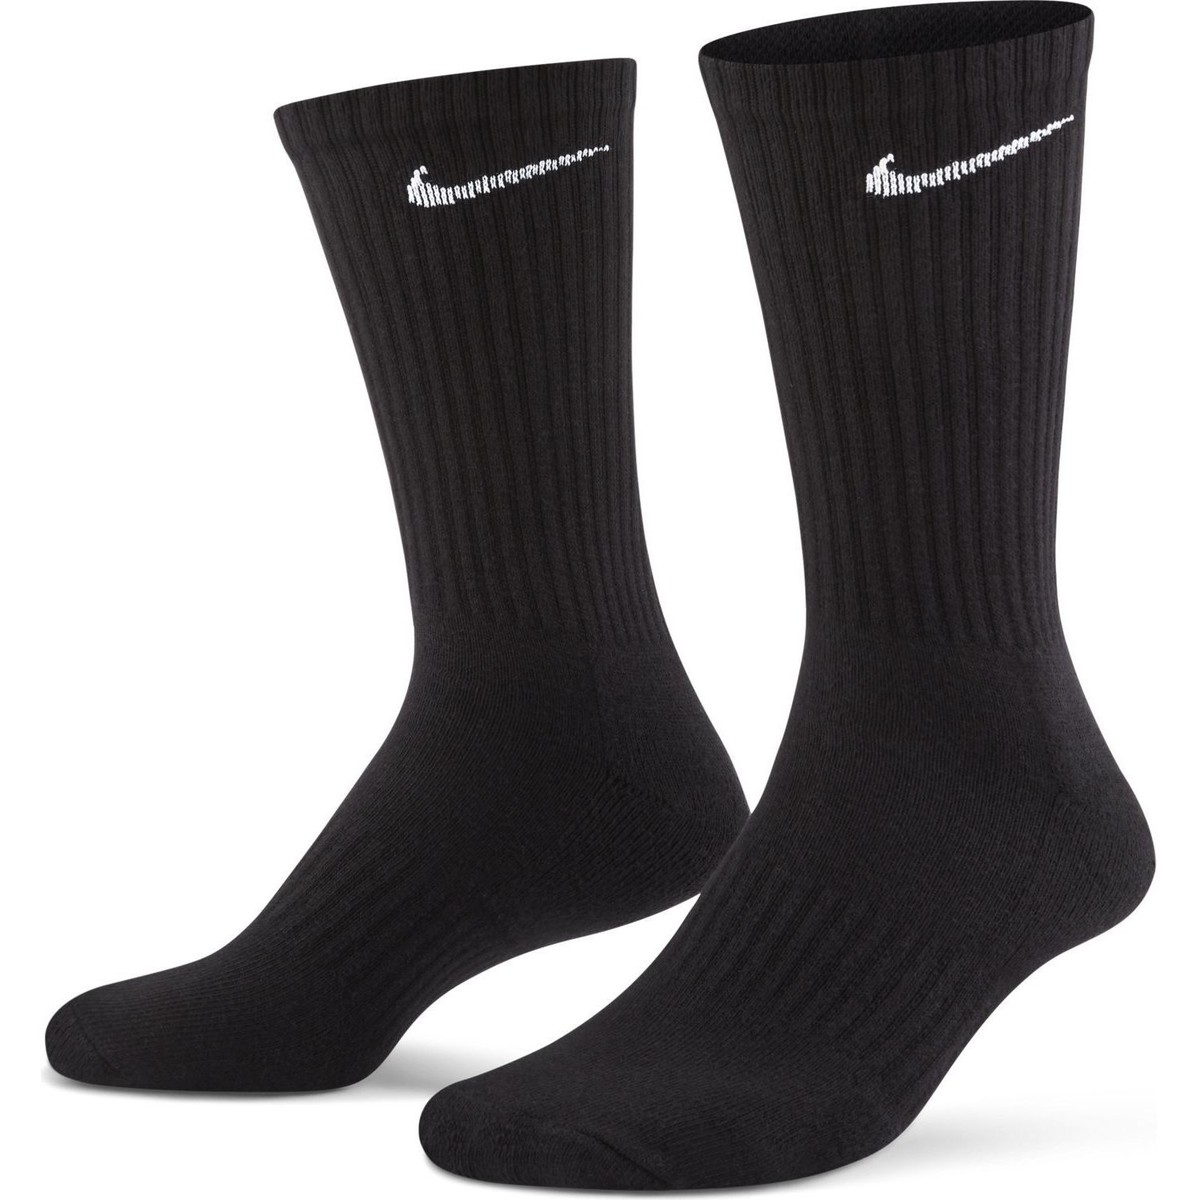 Nike Noir Chaussettes Everyday Cushioned 3 Paires trYAQGUm